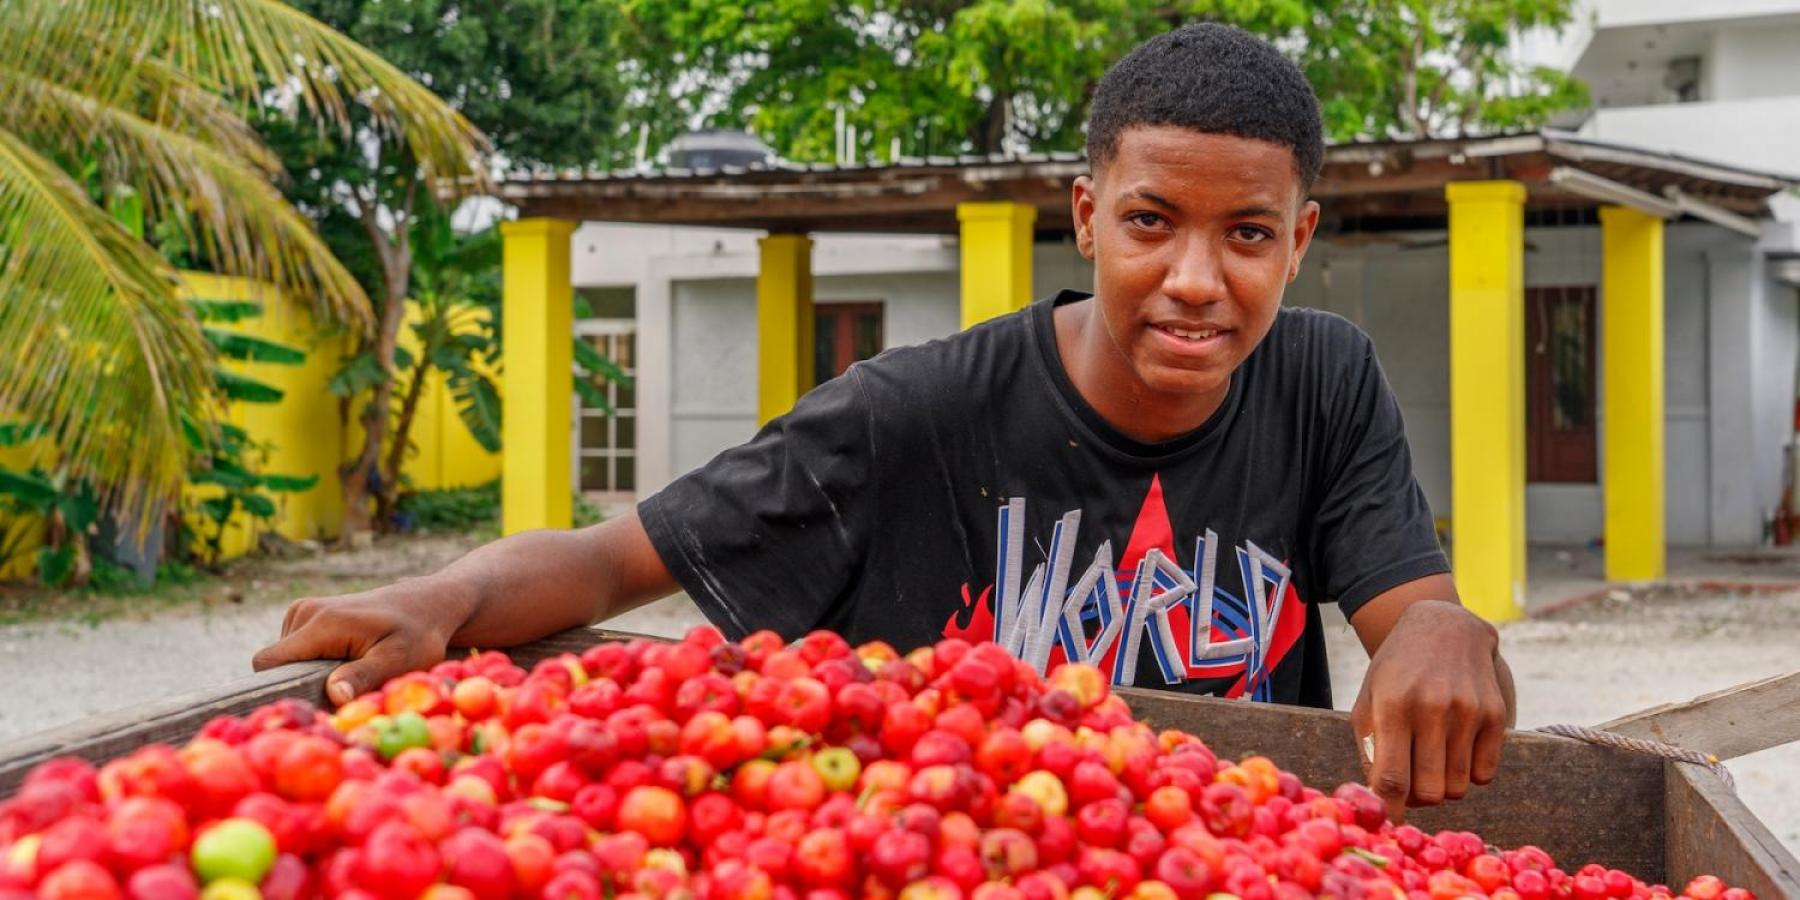 A young boy sells cherries from his garden in Dominican Republic